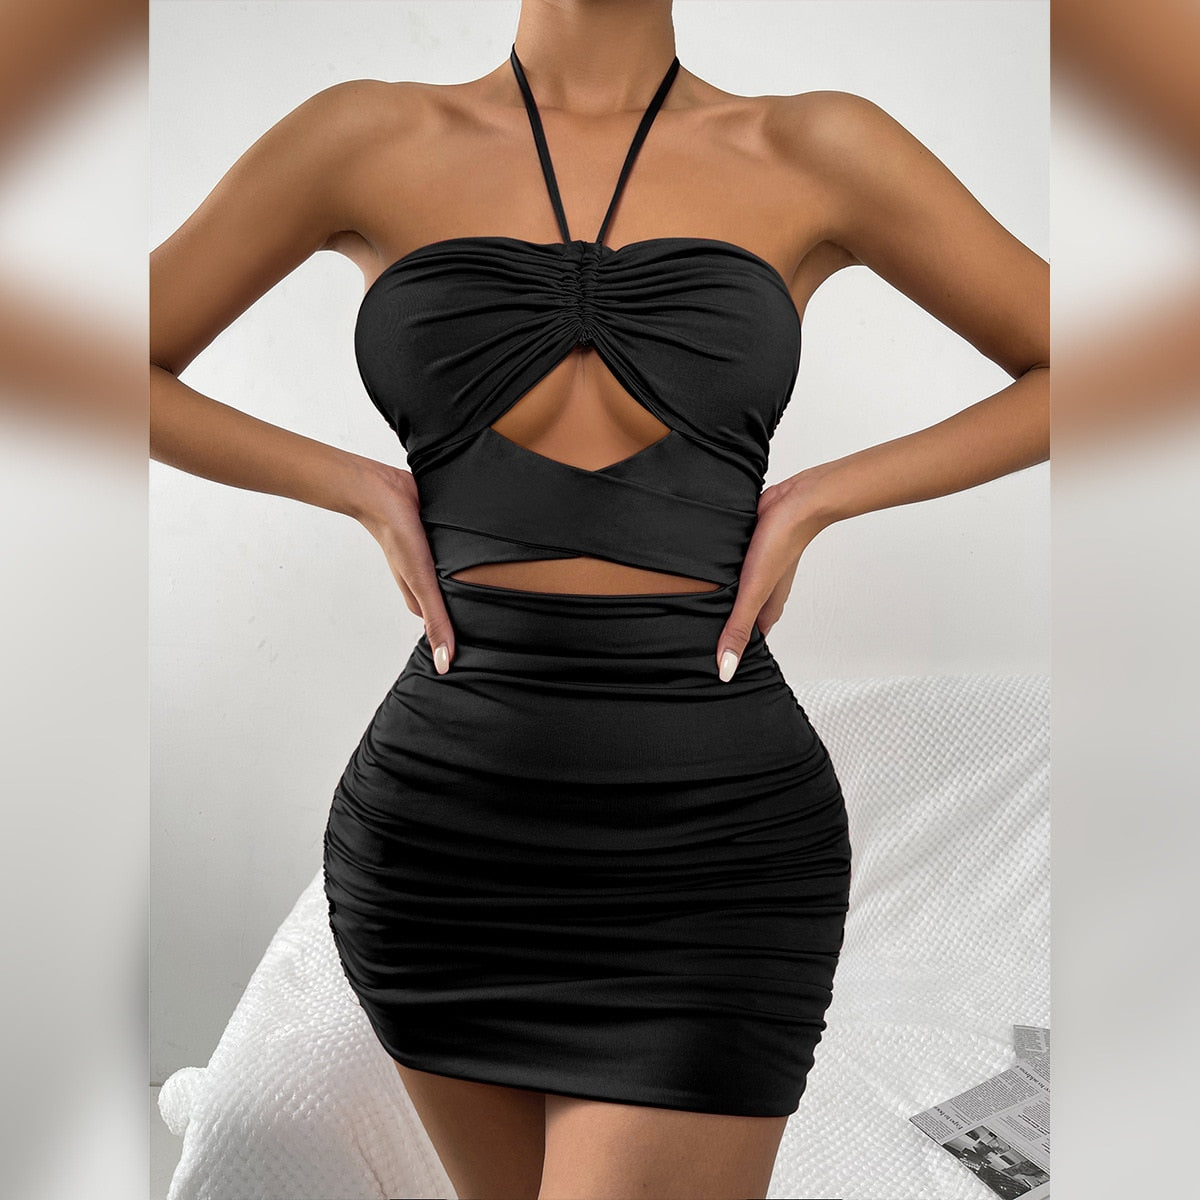 Summer Halter Strapless Women Dress Black Sleeveless Cut-out Bodycon Dress Sexy Backless Night Club Cocktail Party Mini Dresses